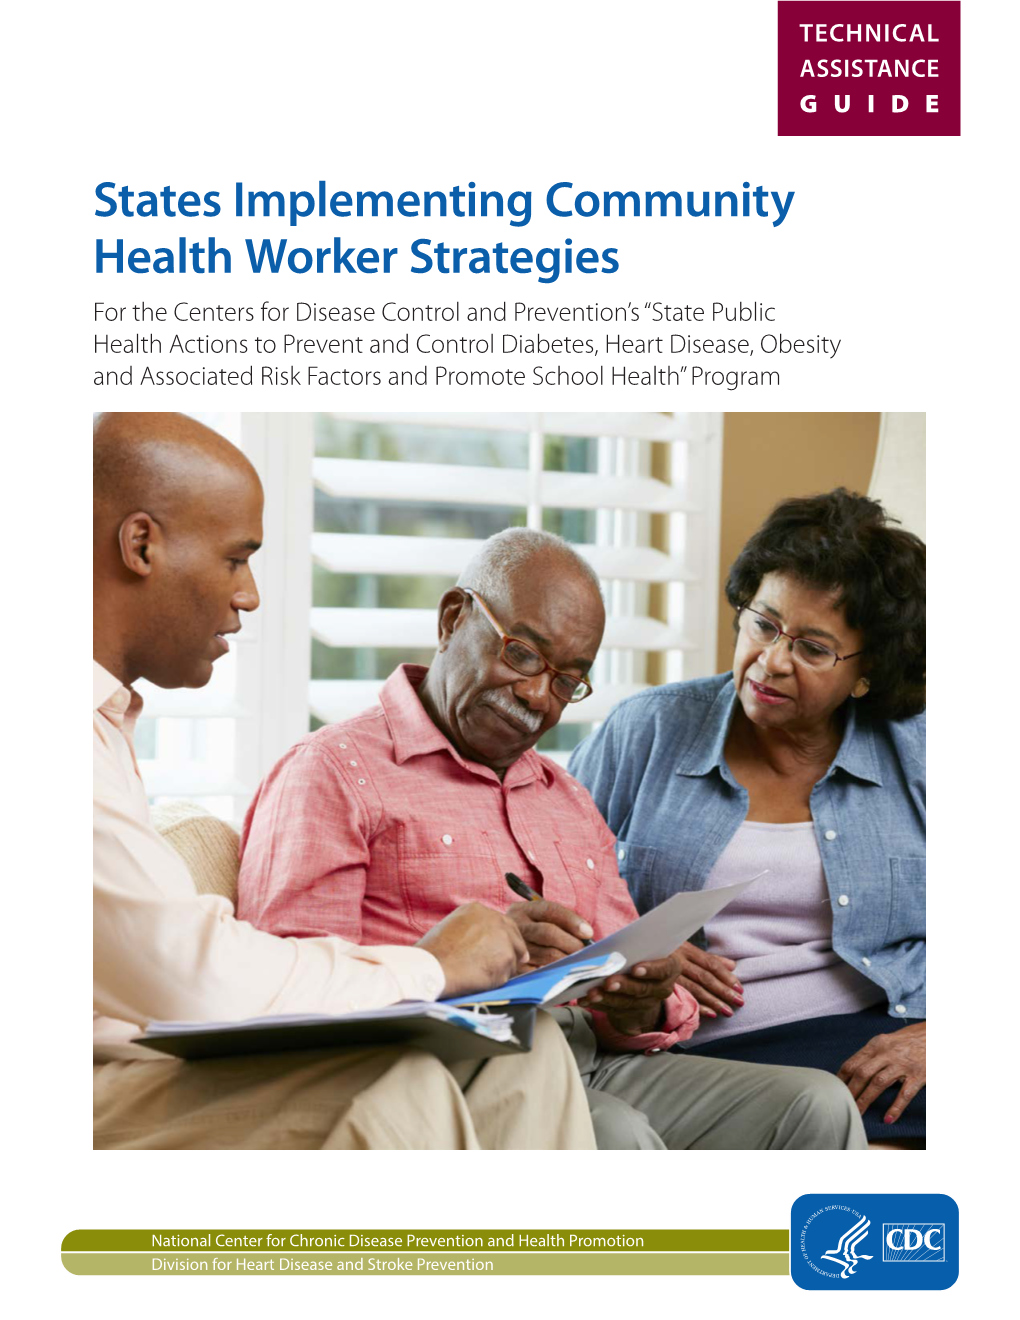 States Implementing Community Health Worker Strategies